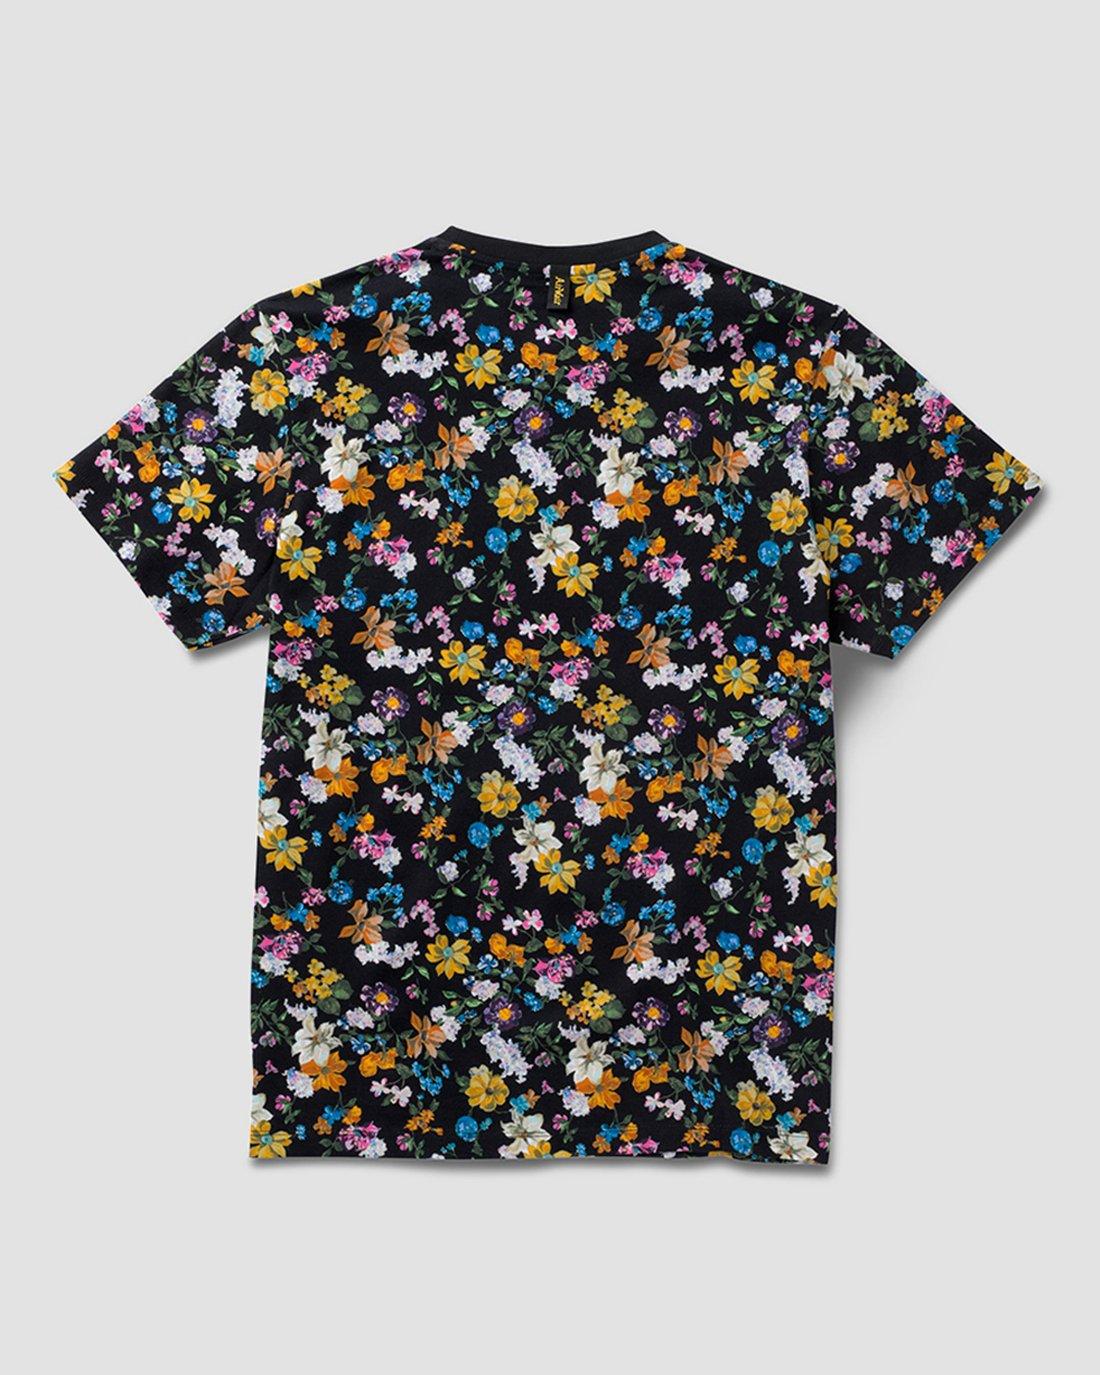 Darcy Floral Short Sleeve T-Shirt in Black